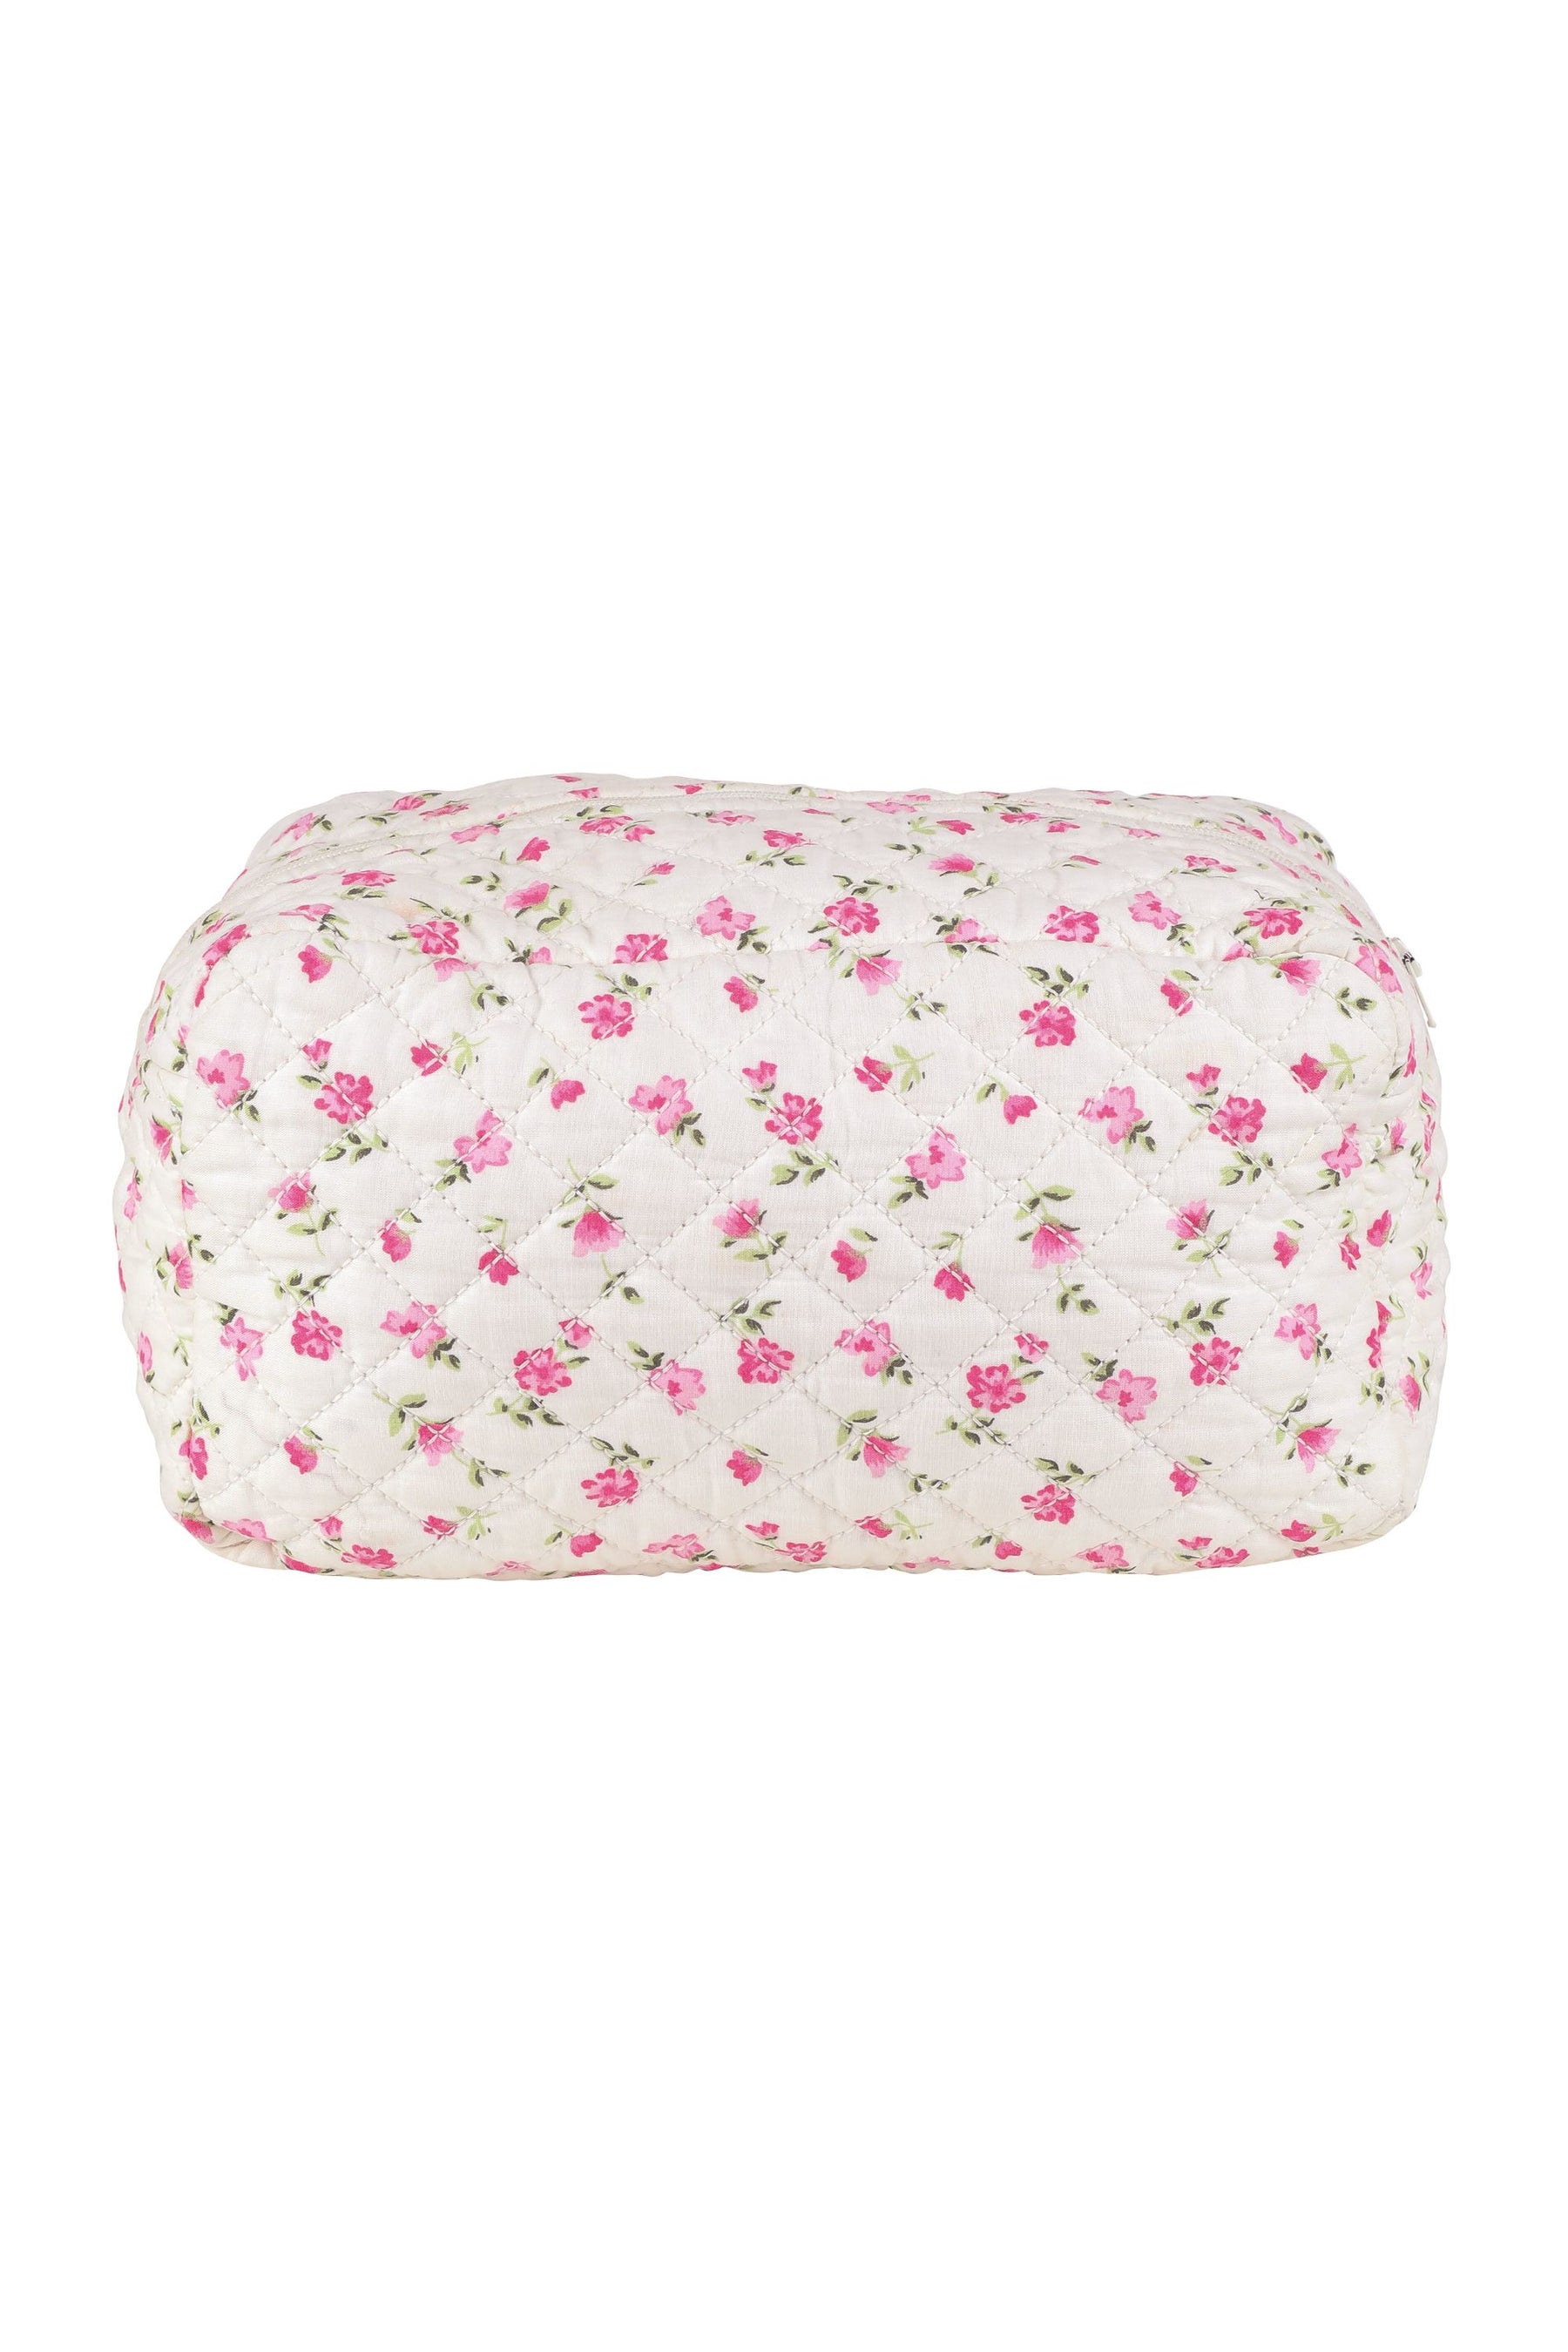 Quilted Makeup Bag in Rose Bloom